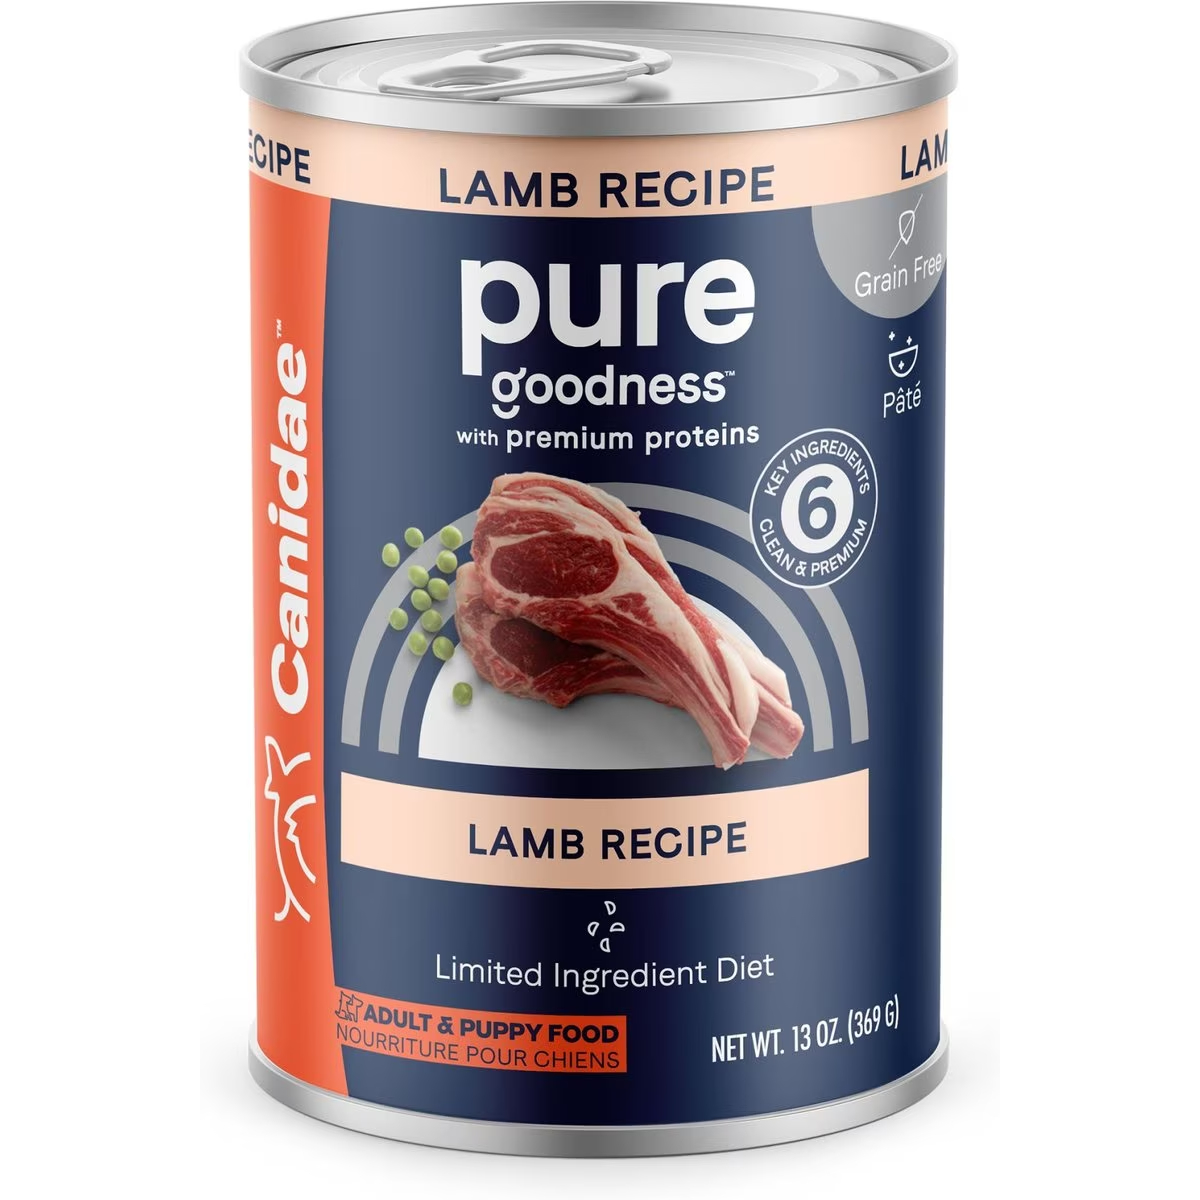 CANIDAE PURE All Stages Grain-Free Limited Ingredient Lamb Recipe Canned Dog Food,